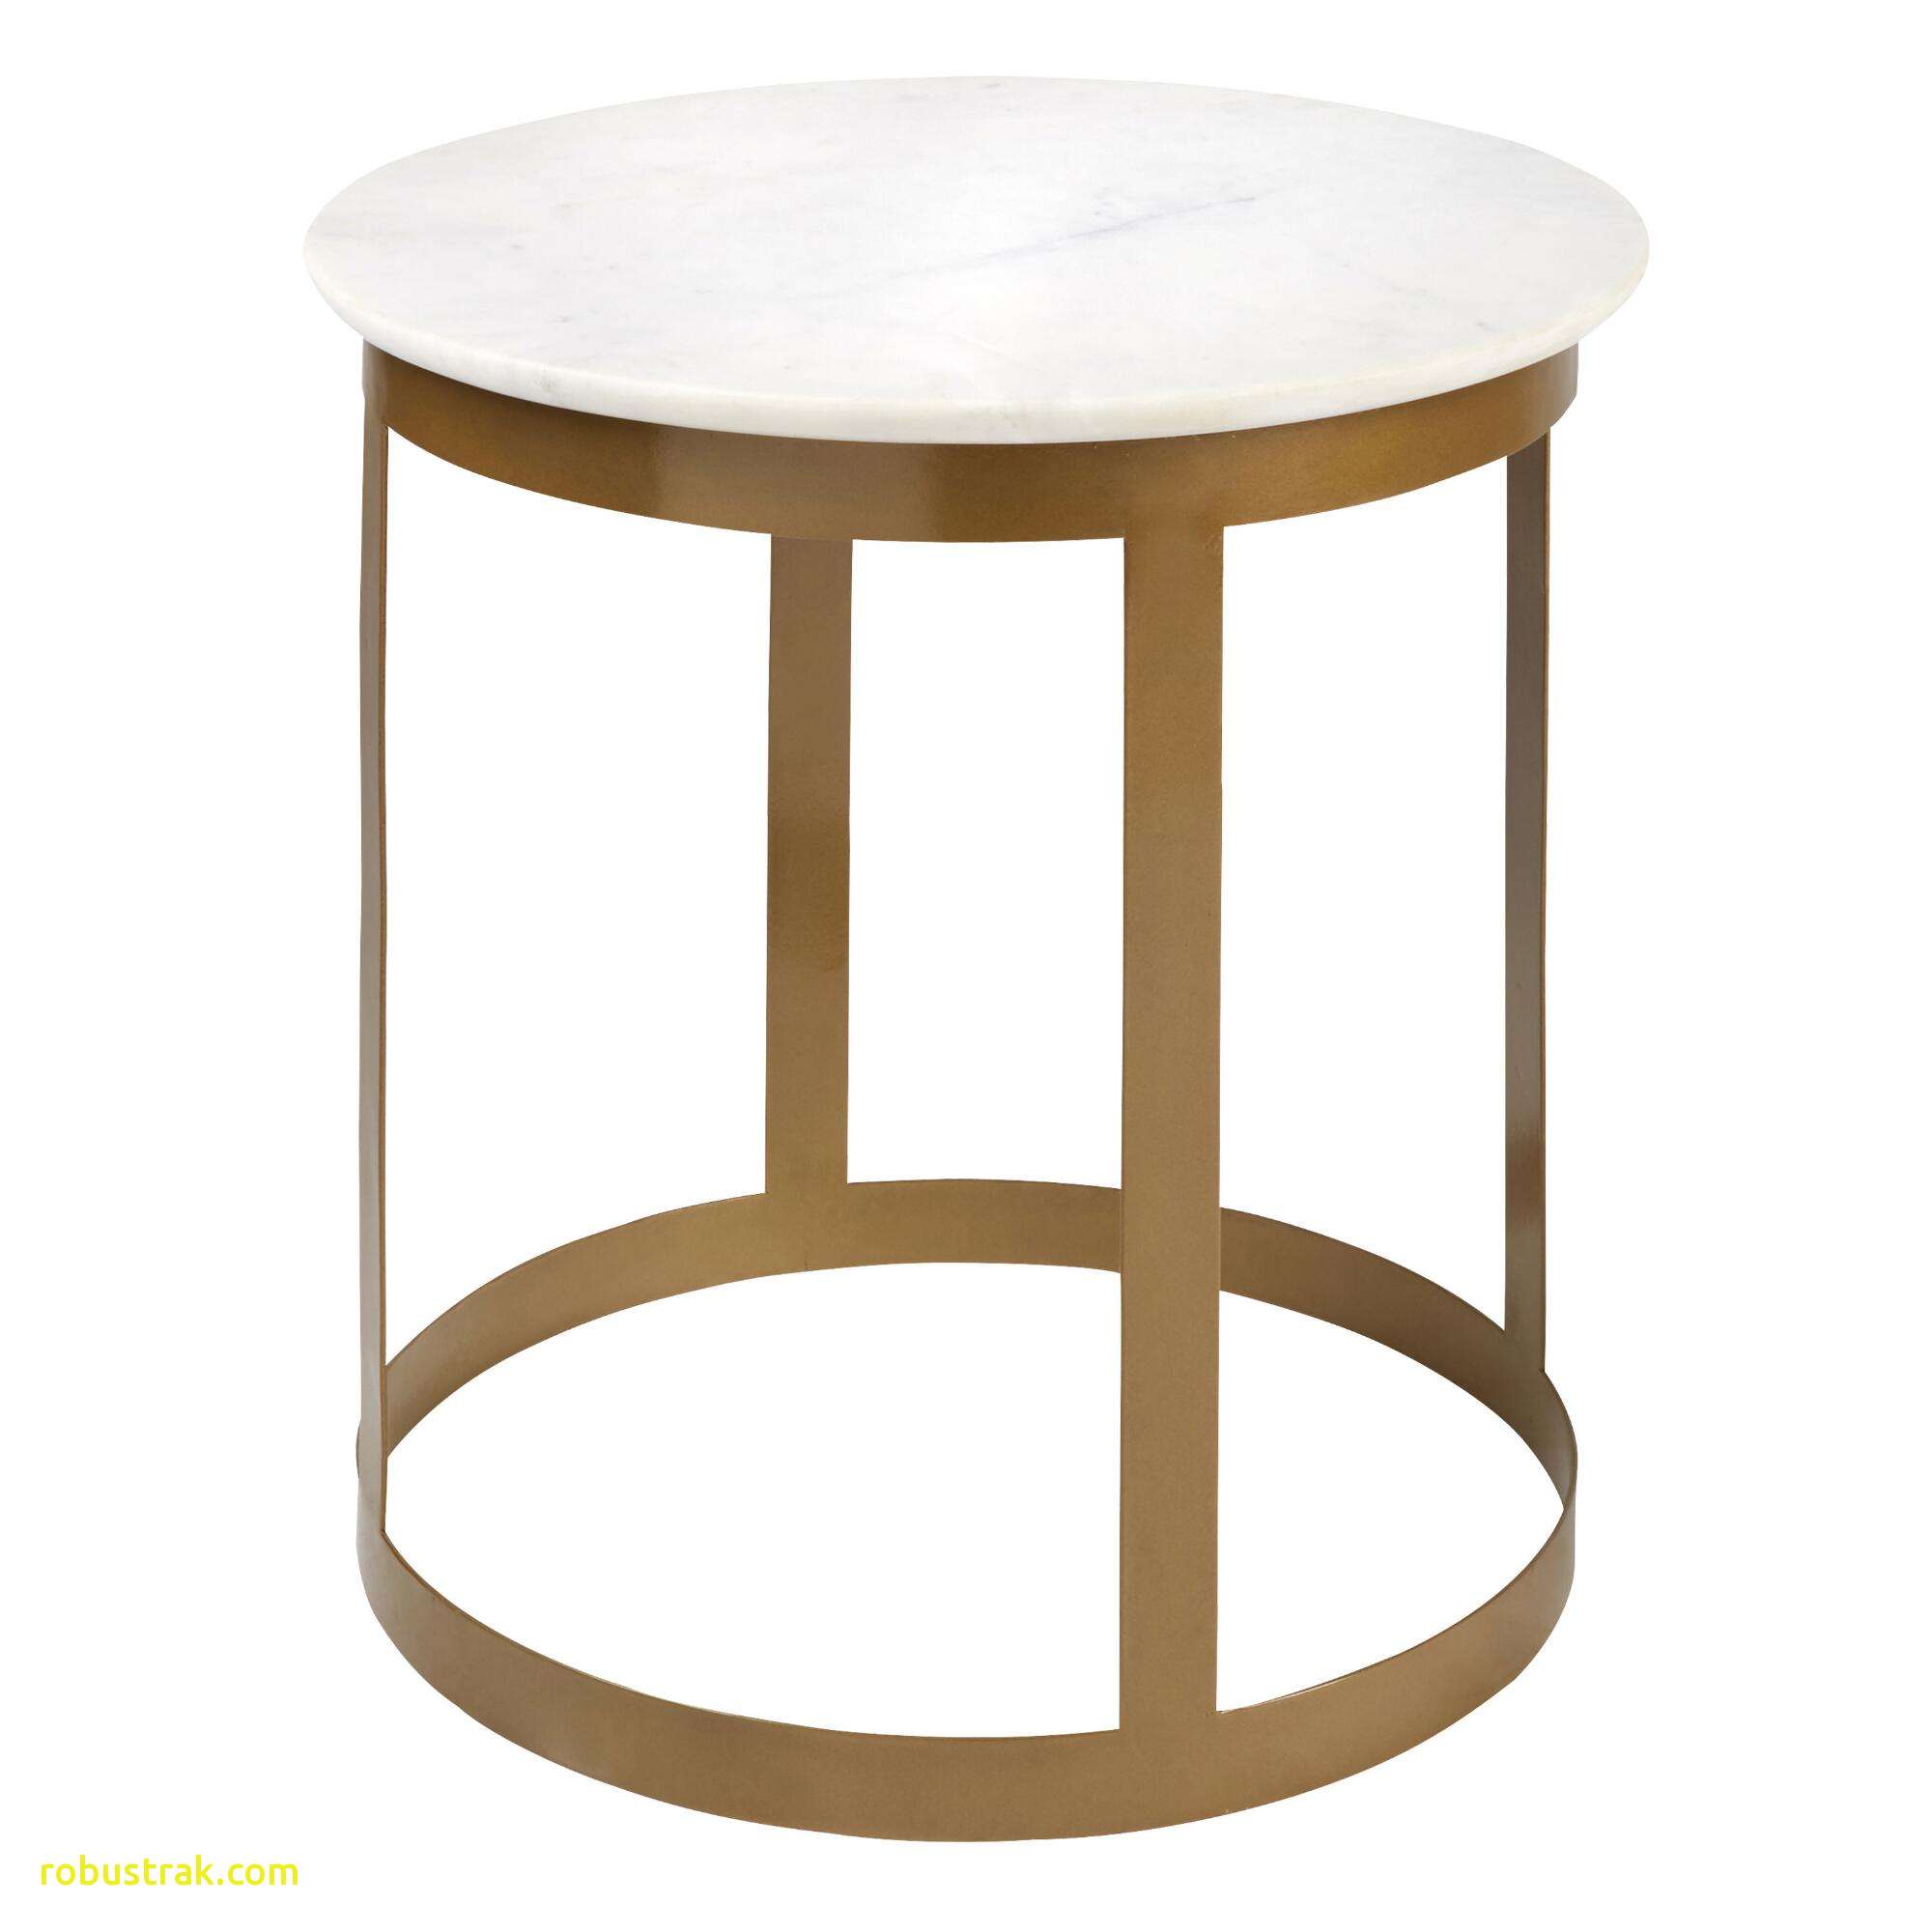 lovely gold side table home design ideas new give your decor the golden touch with our round accent marble adds lux zebra furniture small black glass coffee kitchen and chairs